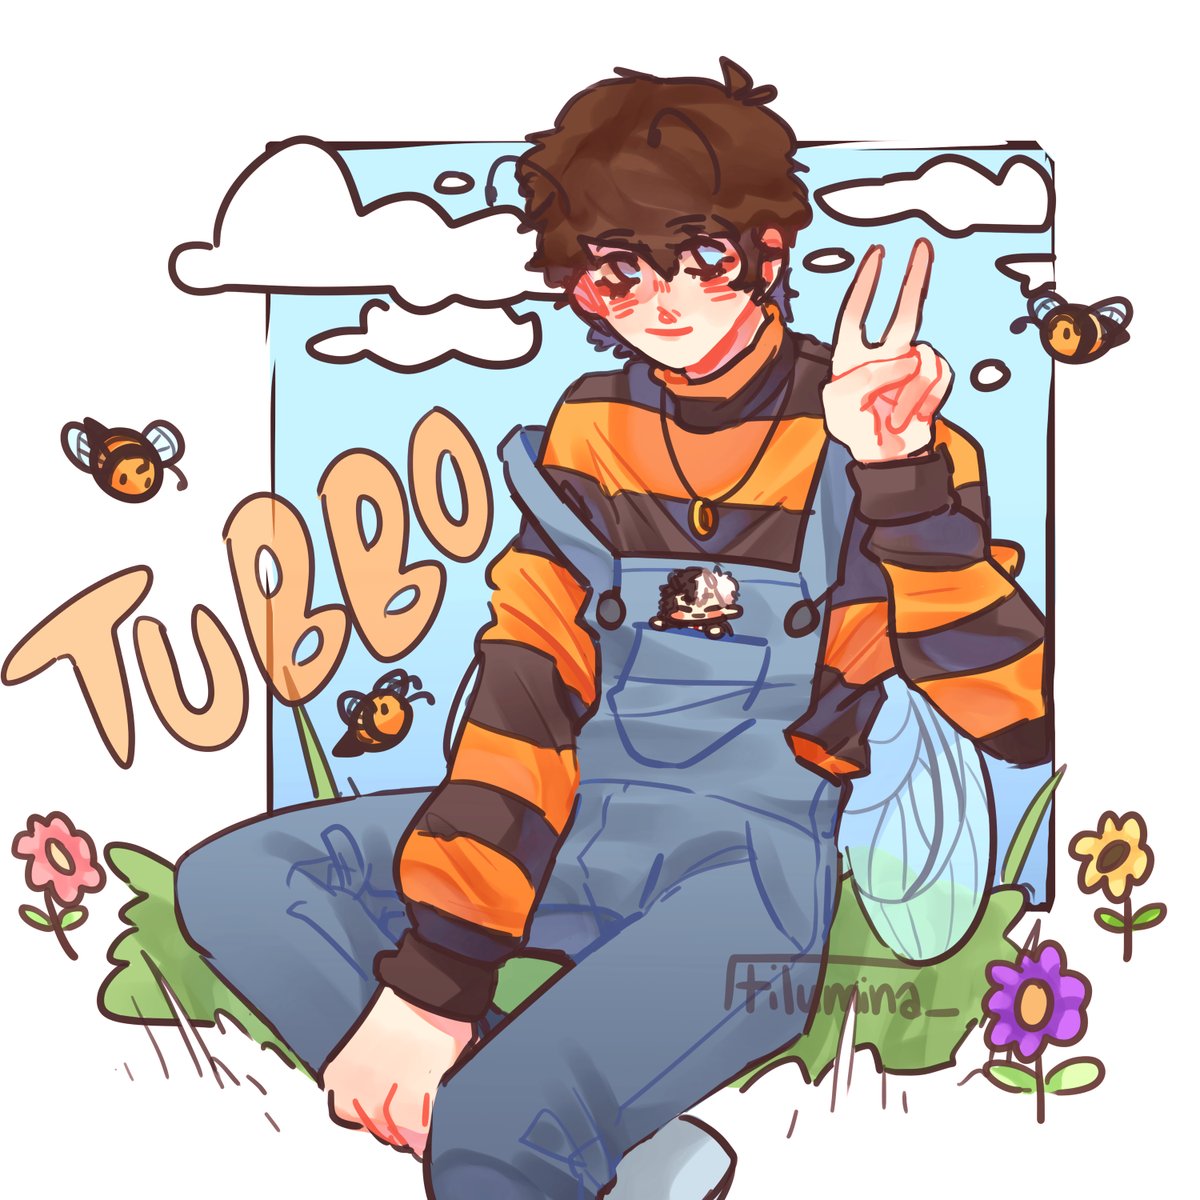 silver on Instagram: tubbee and genderman . . . . . . . #originsmp  #originsmpfanart #fanart #tubbofanart #tubbo #ranboofanart #ranboo